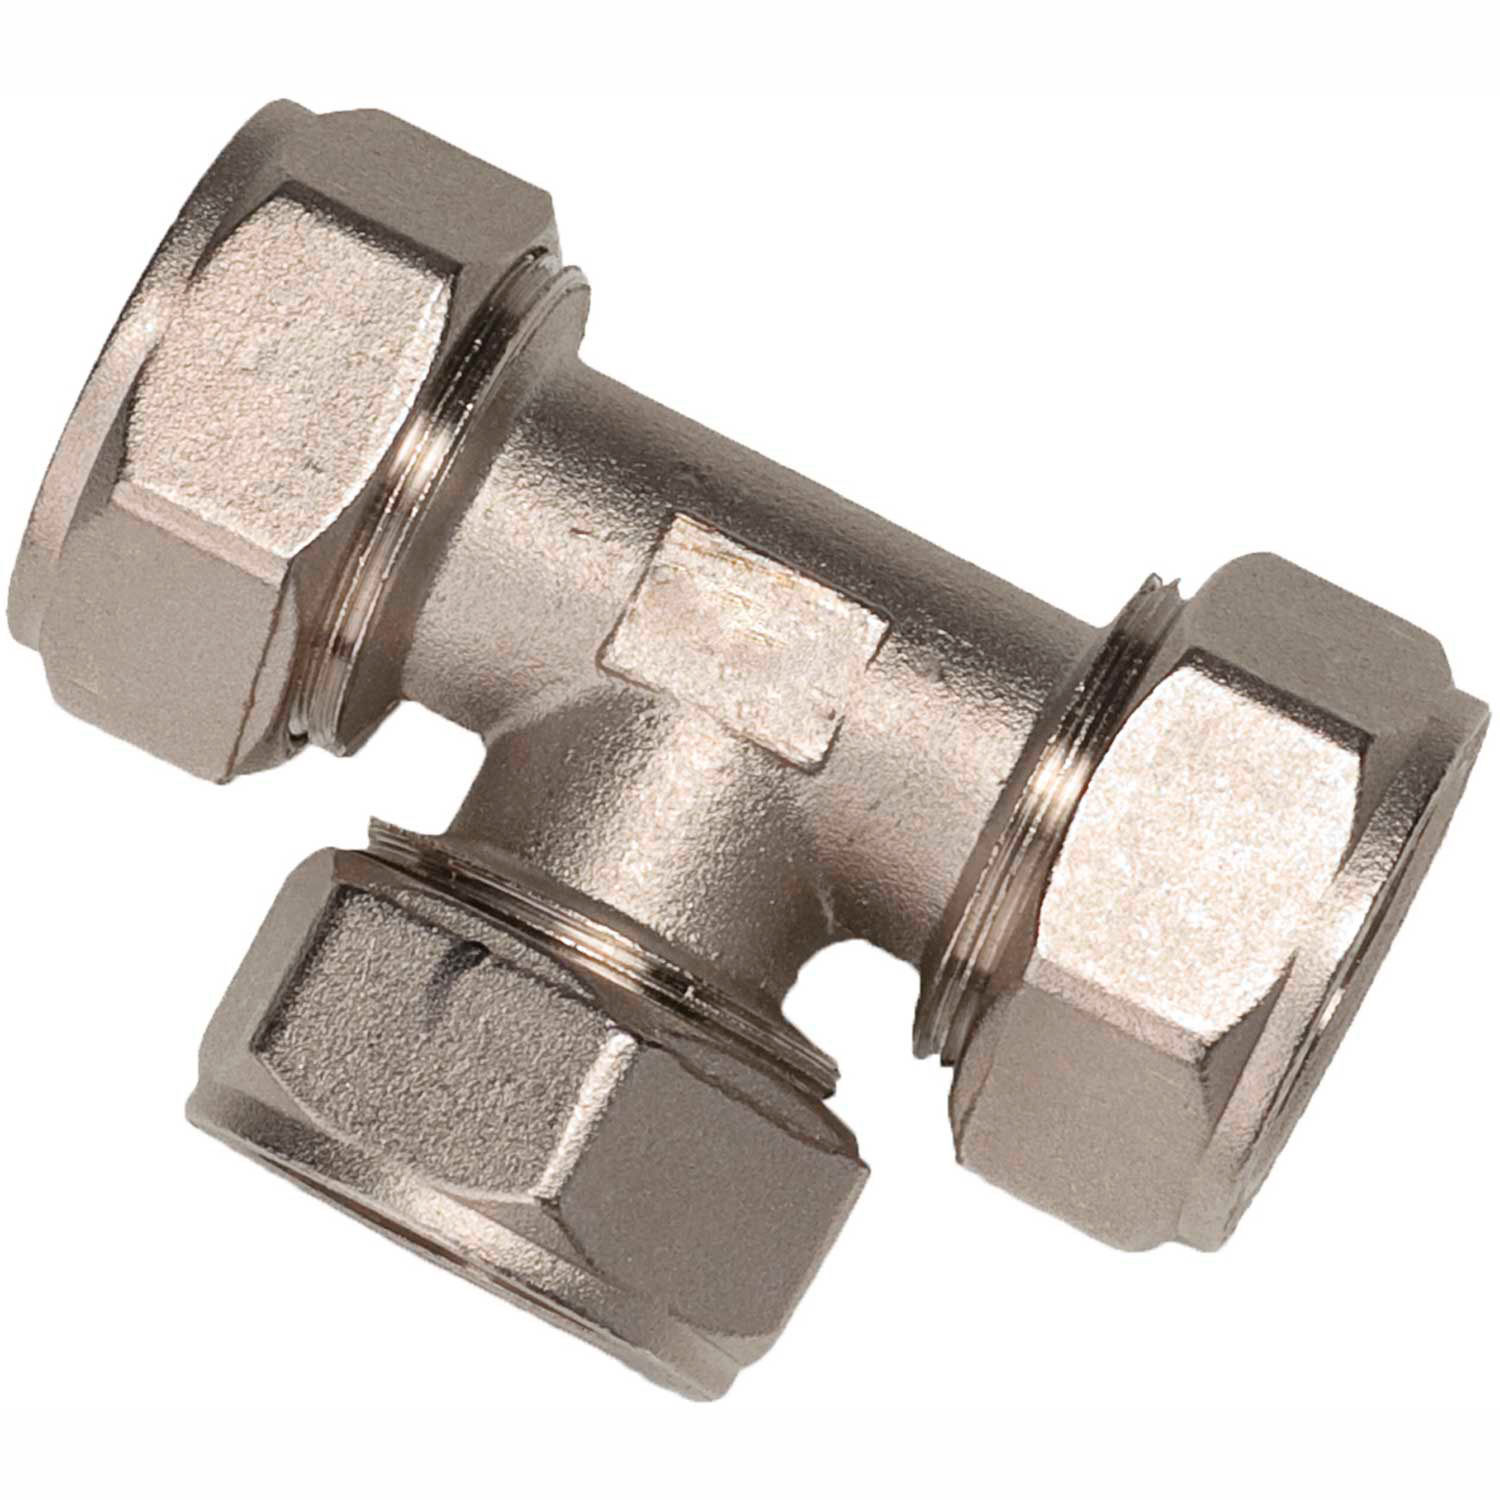 Hydraulic Tube x Tube Coupling Equal Tee Heavy Series Compression Fitting 